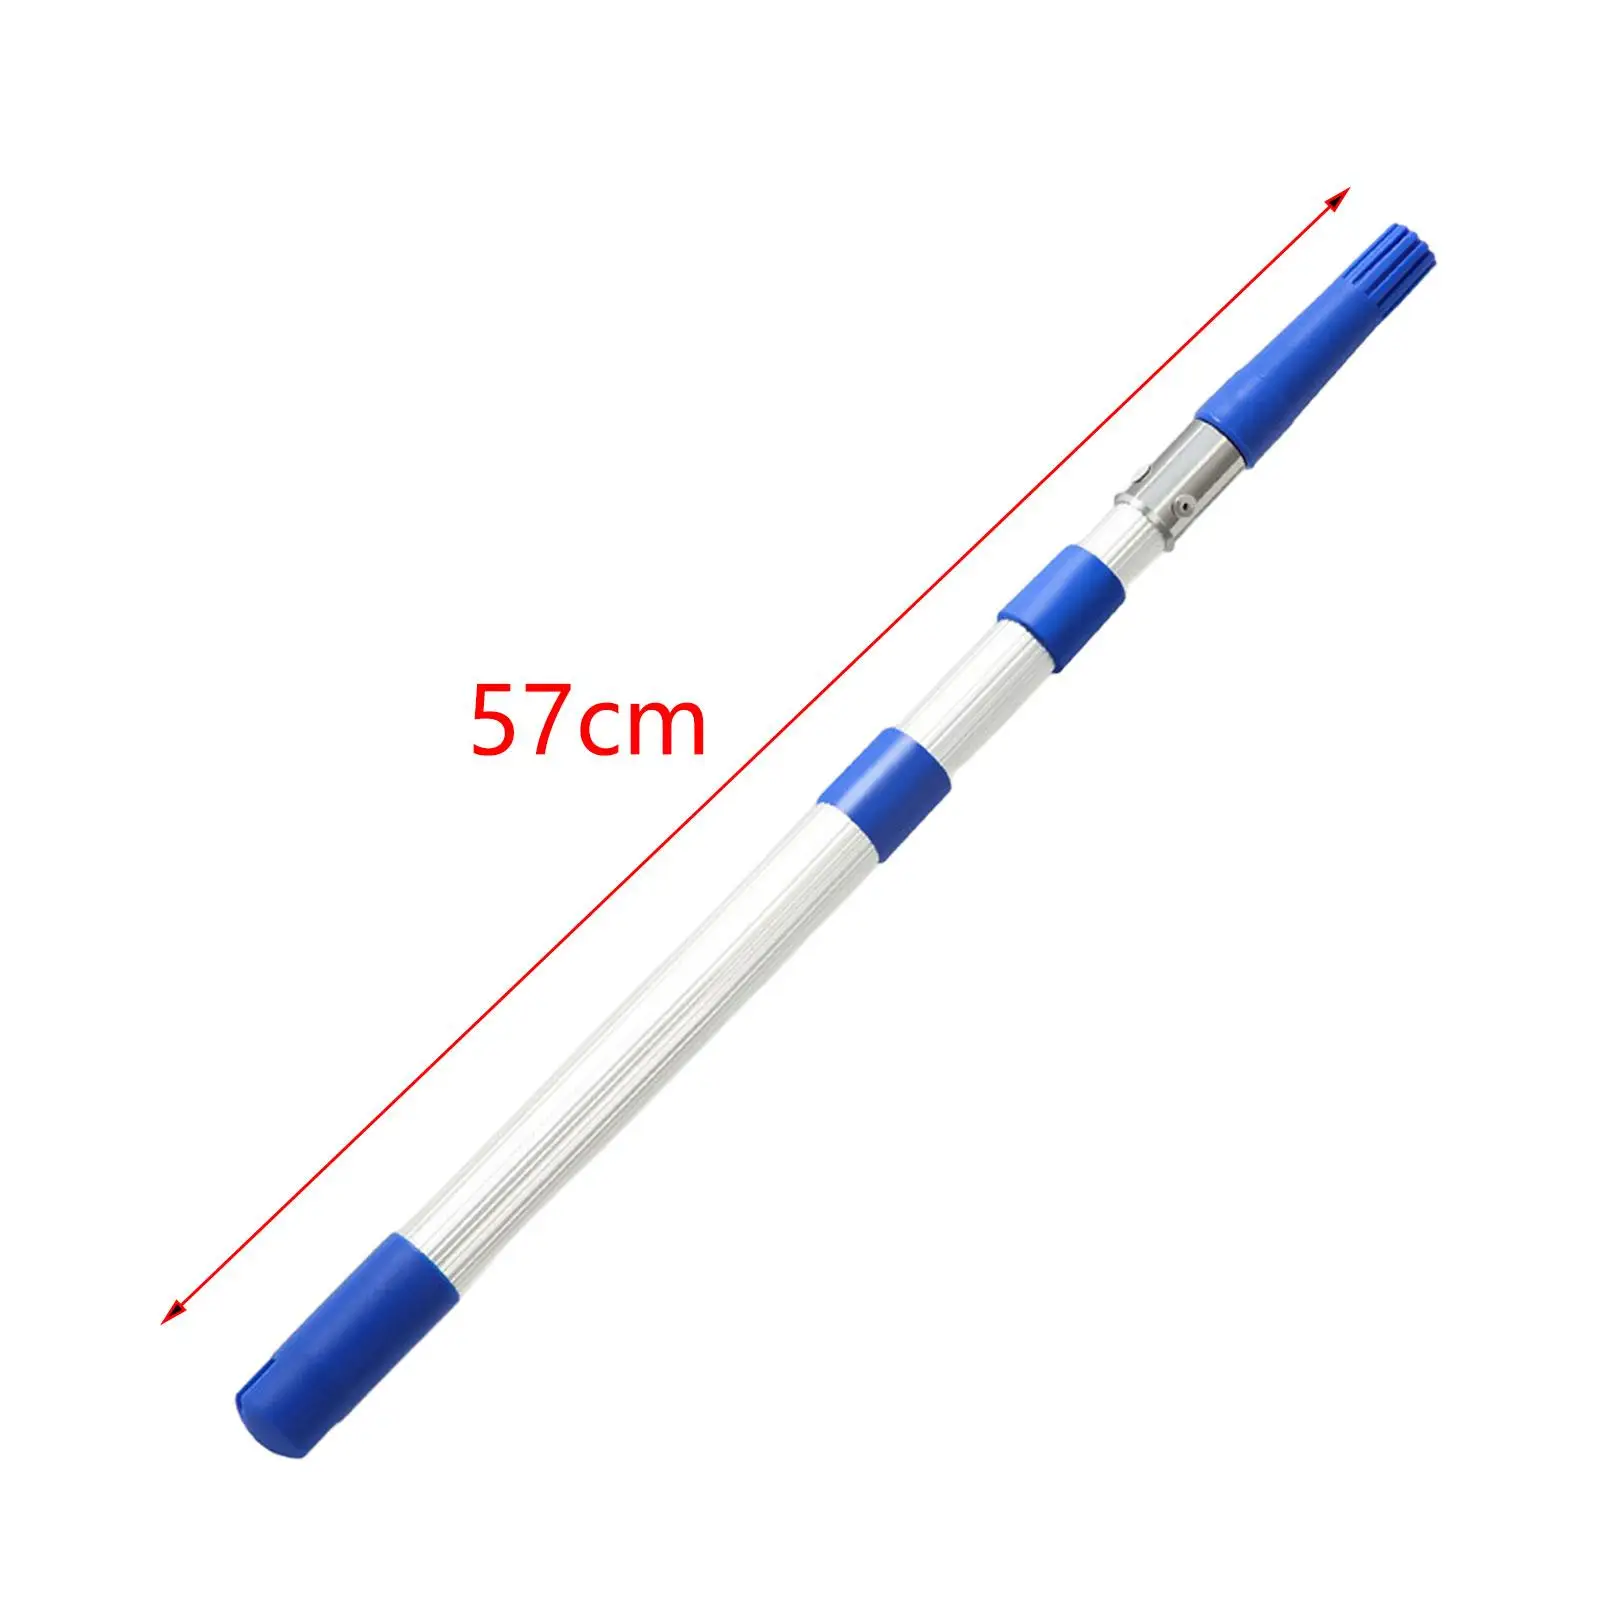 Paint Roller Rod Flexible Roller Paint Brush for Wall Painting Supplies Interior Exterior Wall for Applying Paints Primers Women